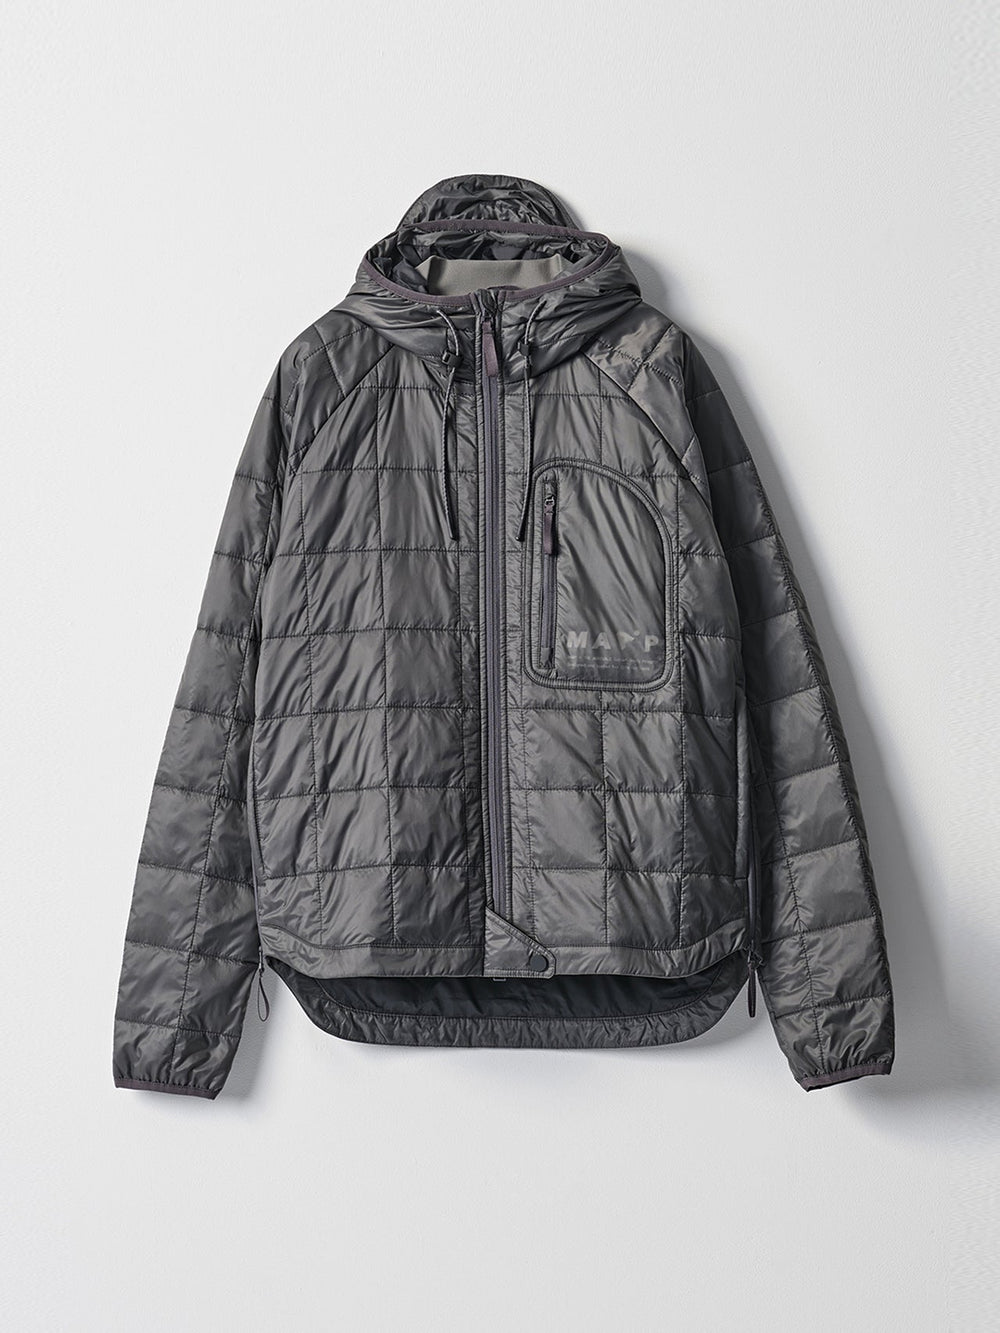 Product Image for The Arrivals + MAAP Alt_Road Haelo Packable Jacket